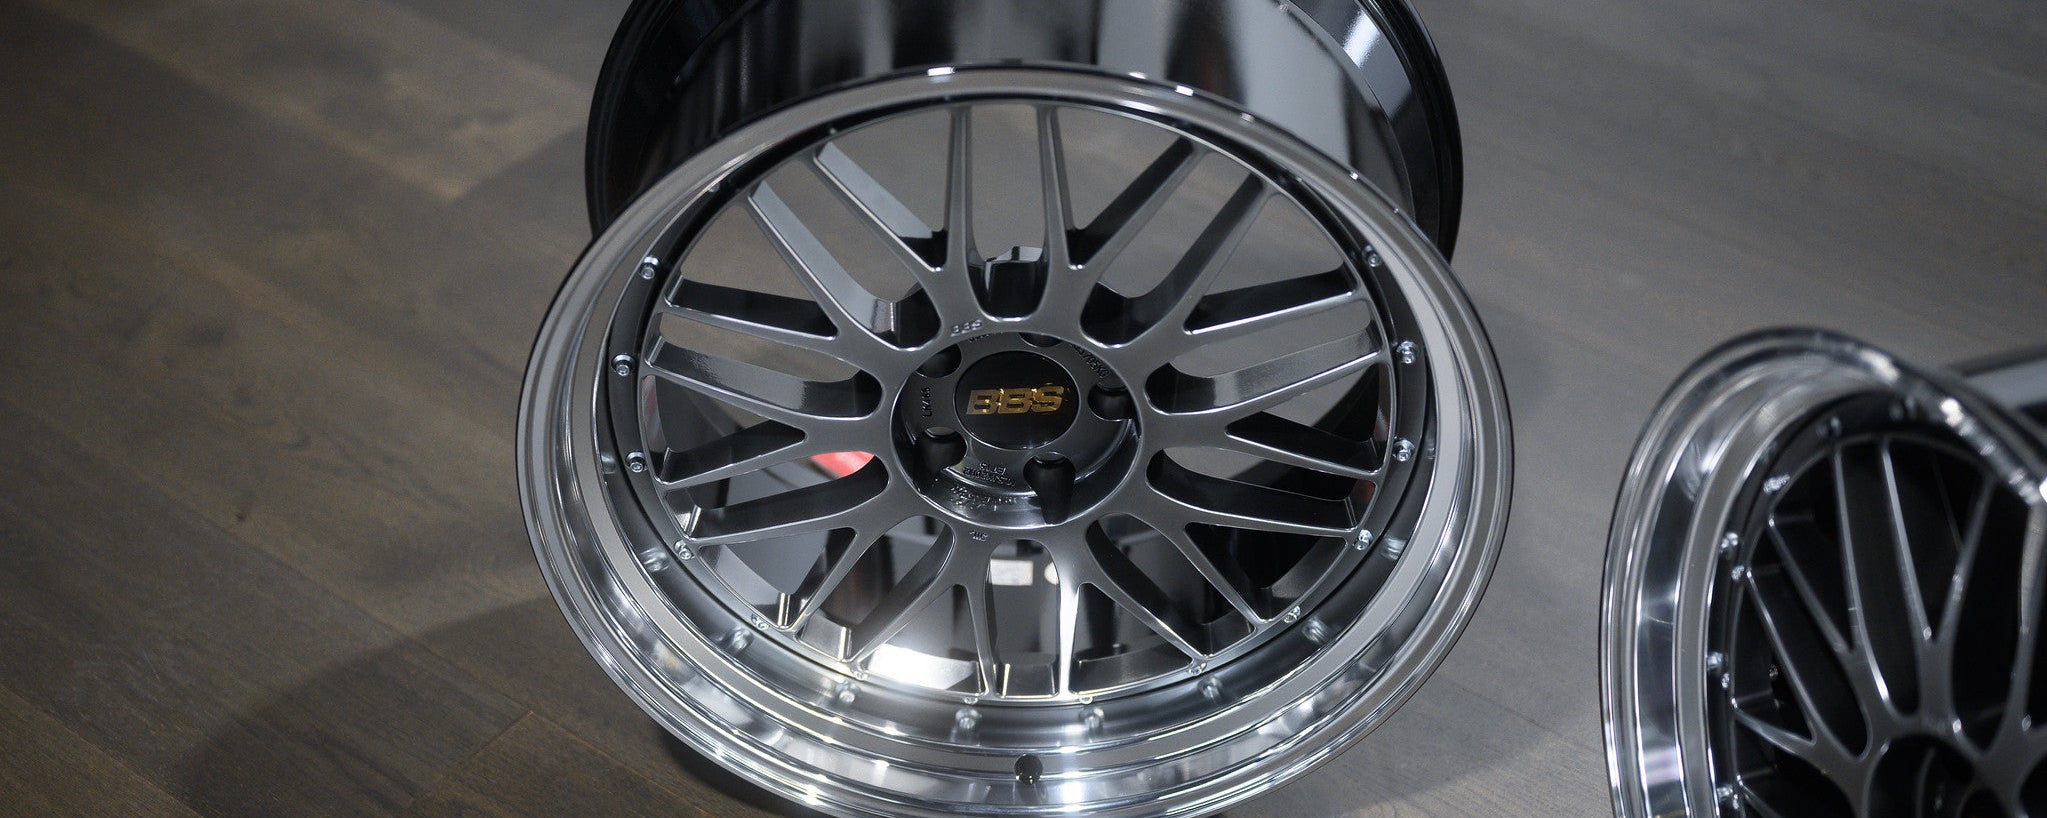 BBS LM - Premium Wheels from BBS Japan - From just $4650.00! Shop now at MK MOTORSPORTS